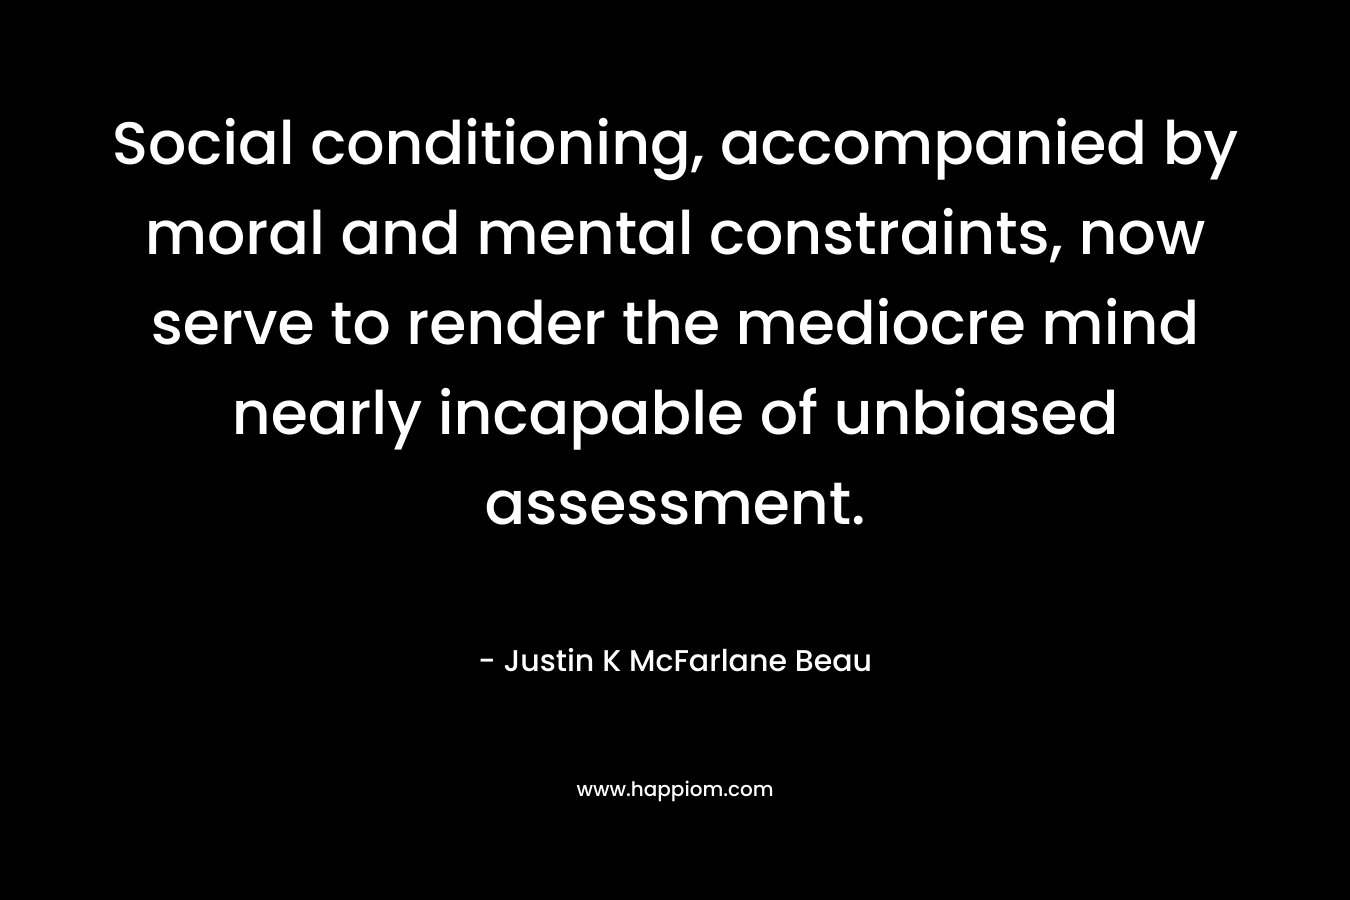 Social conditioning, accompanied by moral and mental constraints, now serve to render the mediocre mind nearly incapable of unbiased assessment. – Justin K McFarlane Beau